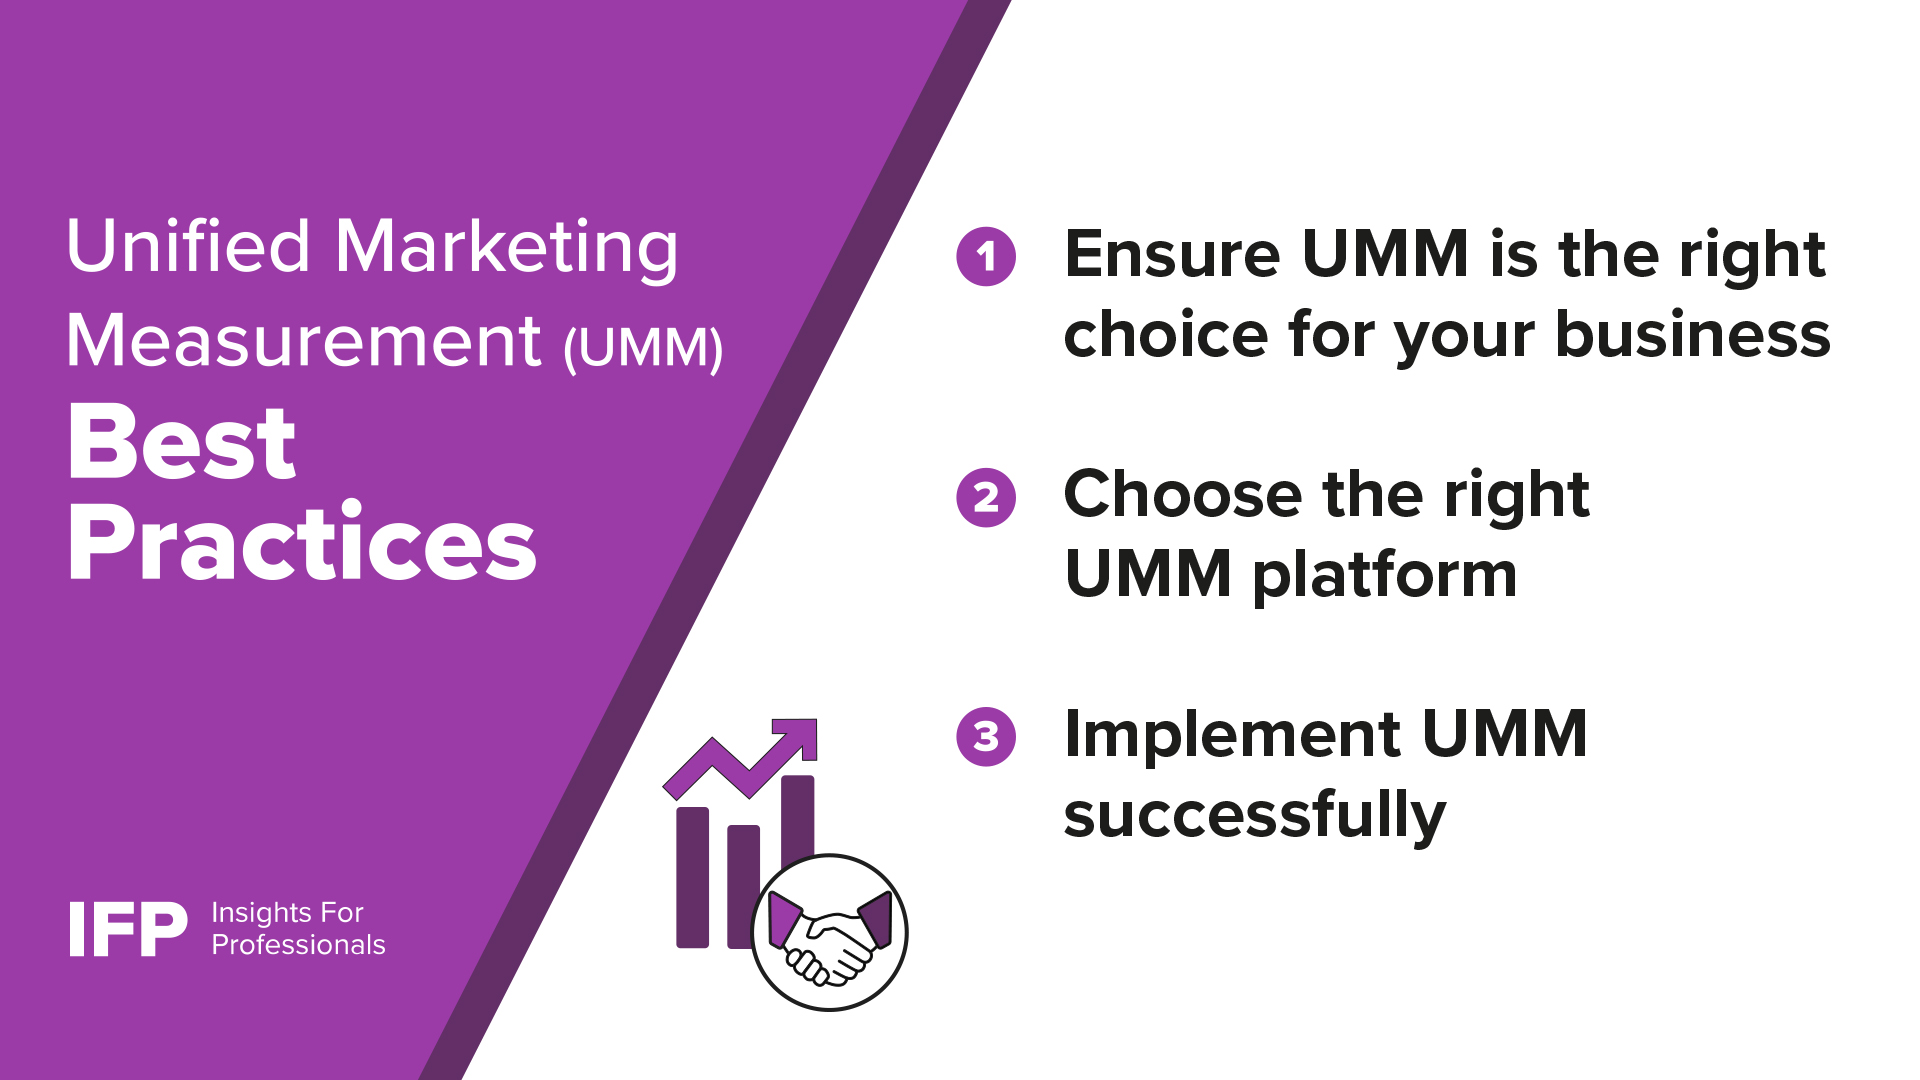 IFP visual on the 3 best practices marketers need to apply for Unified Marketing Measurement